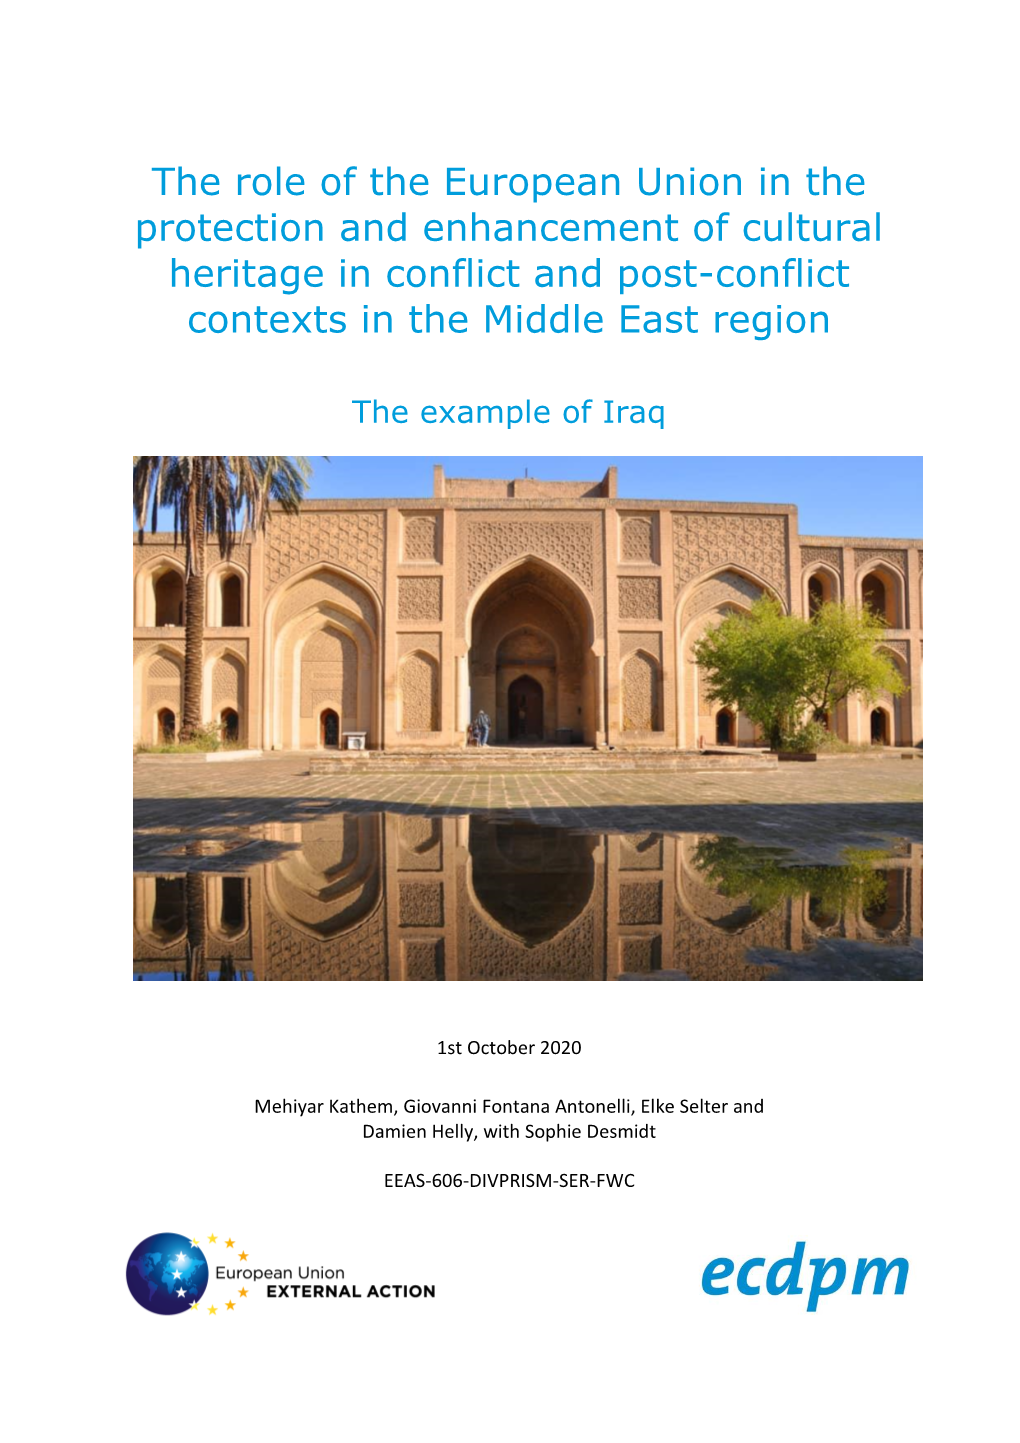 The Role of the European Union in the Protection and Enhancement of Cultural Heritage in Conflict and Post-Conflict Contexts in the Middle East Region